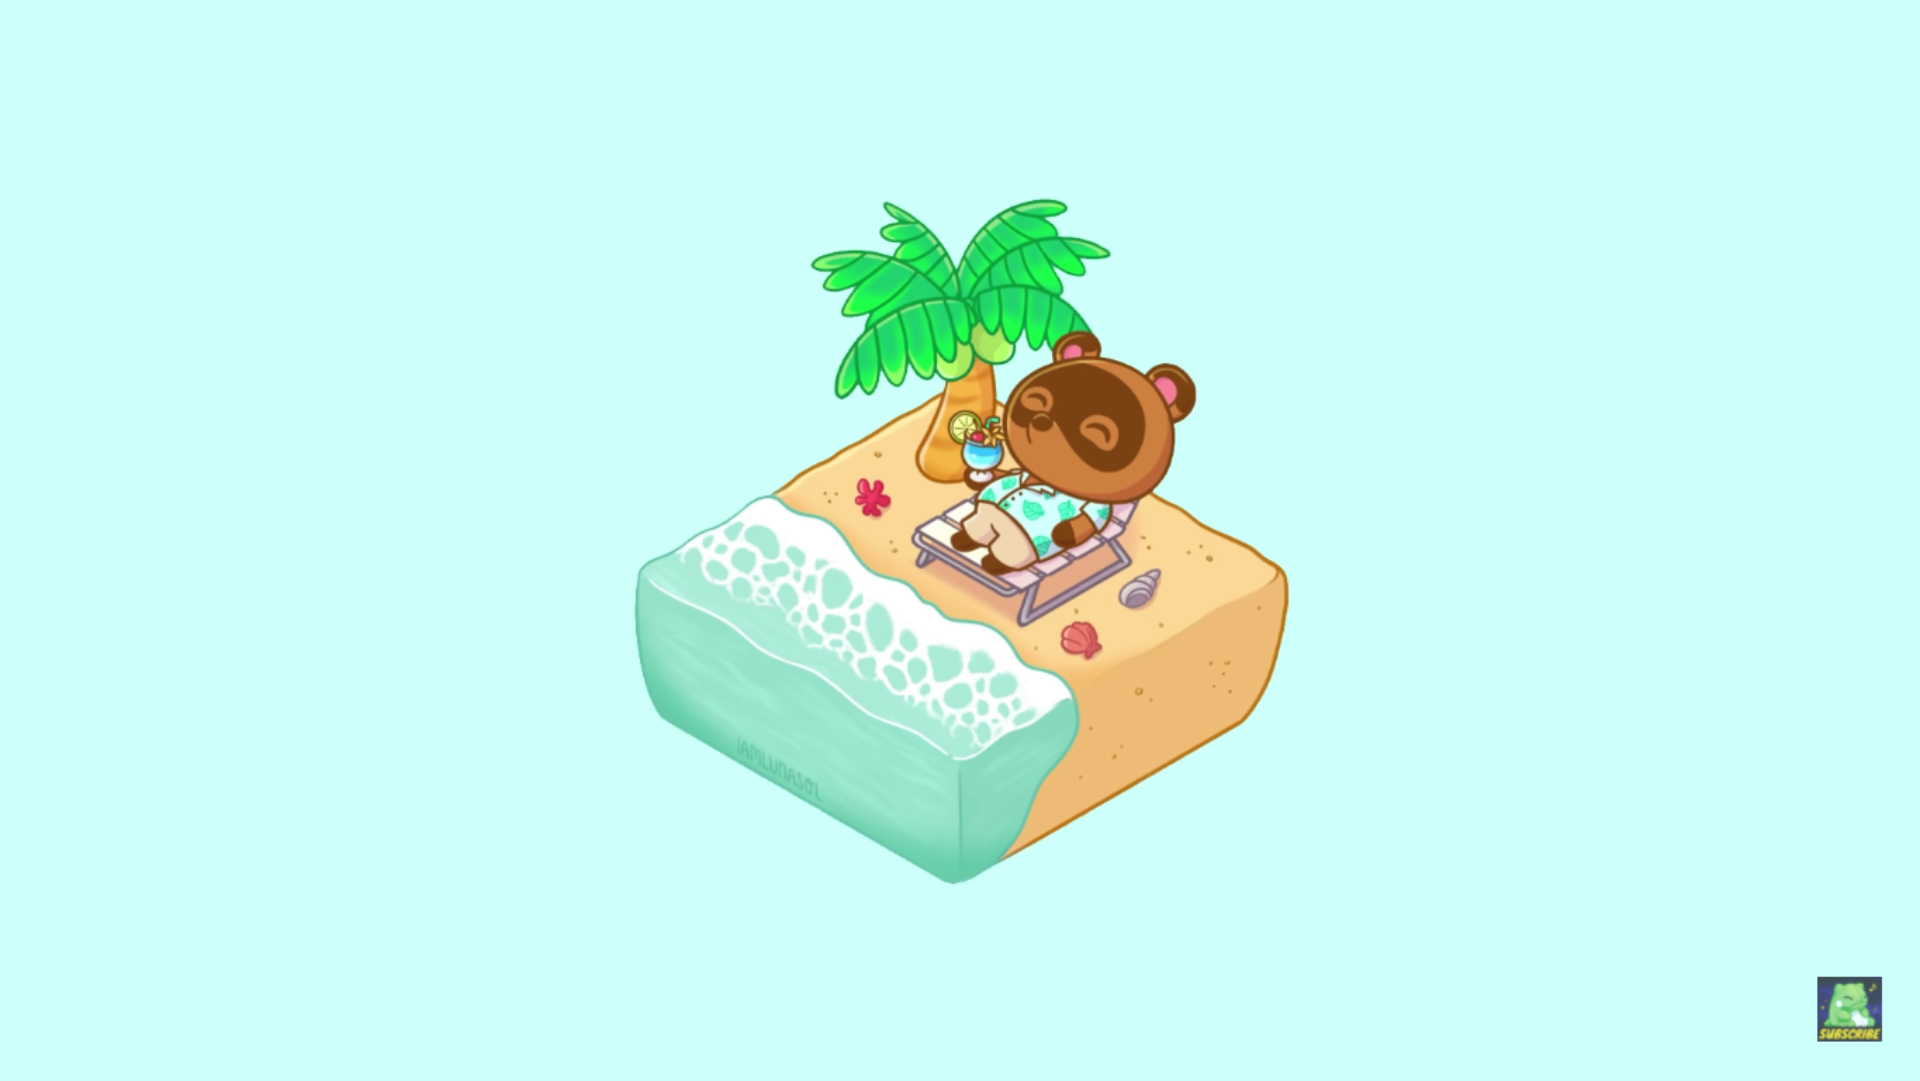 General 1920x1081 LoFi Animal Crossing Animal Crossing New Horizons beach Chill Out YouTube minimalism simple background Tom Nook palm trees relaxing seashells alcohol happy diorama